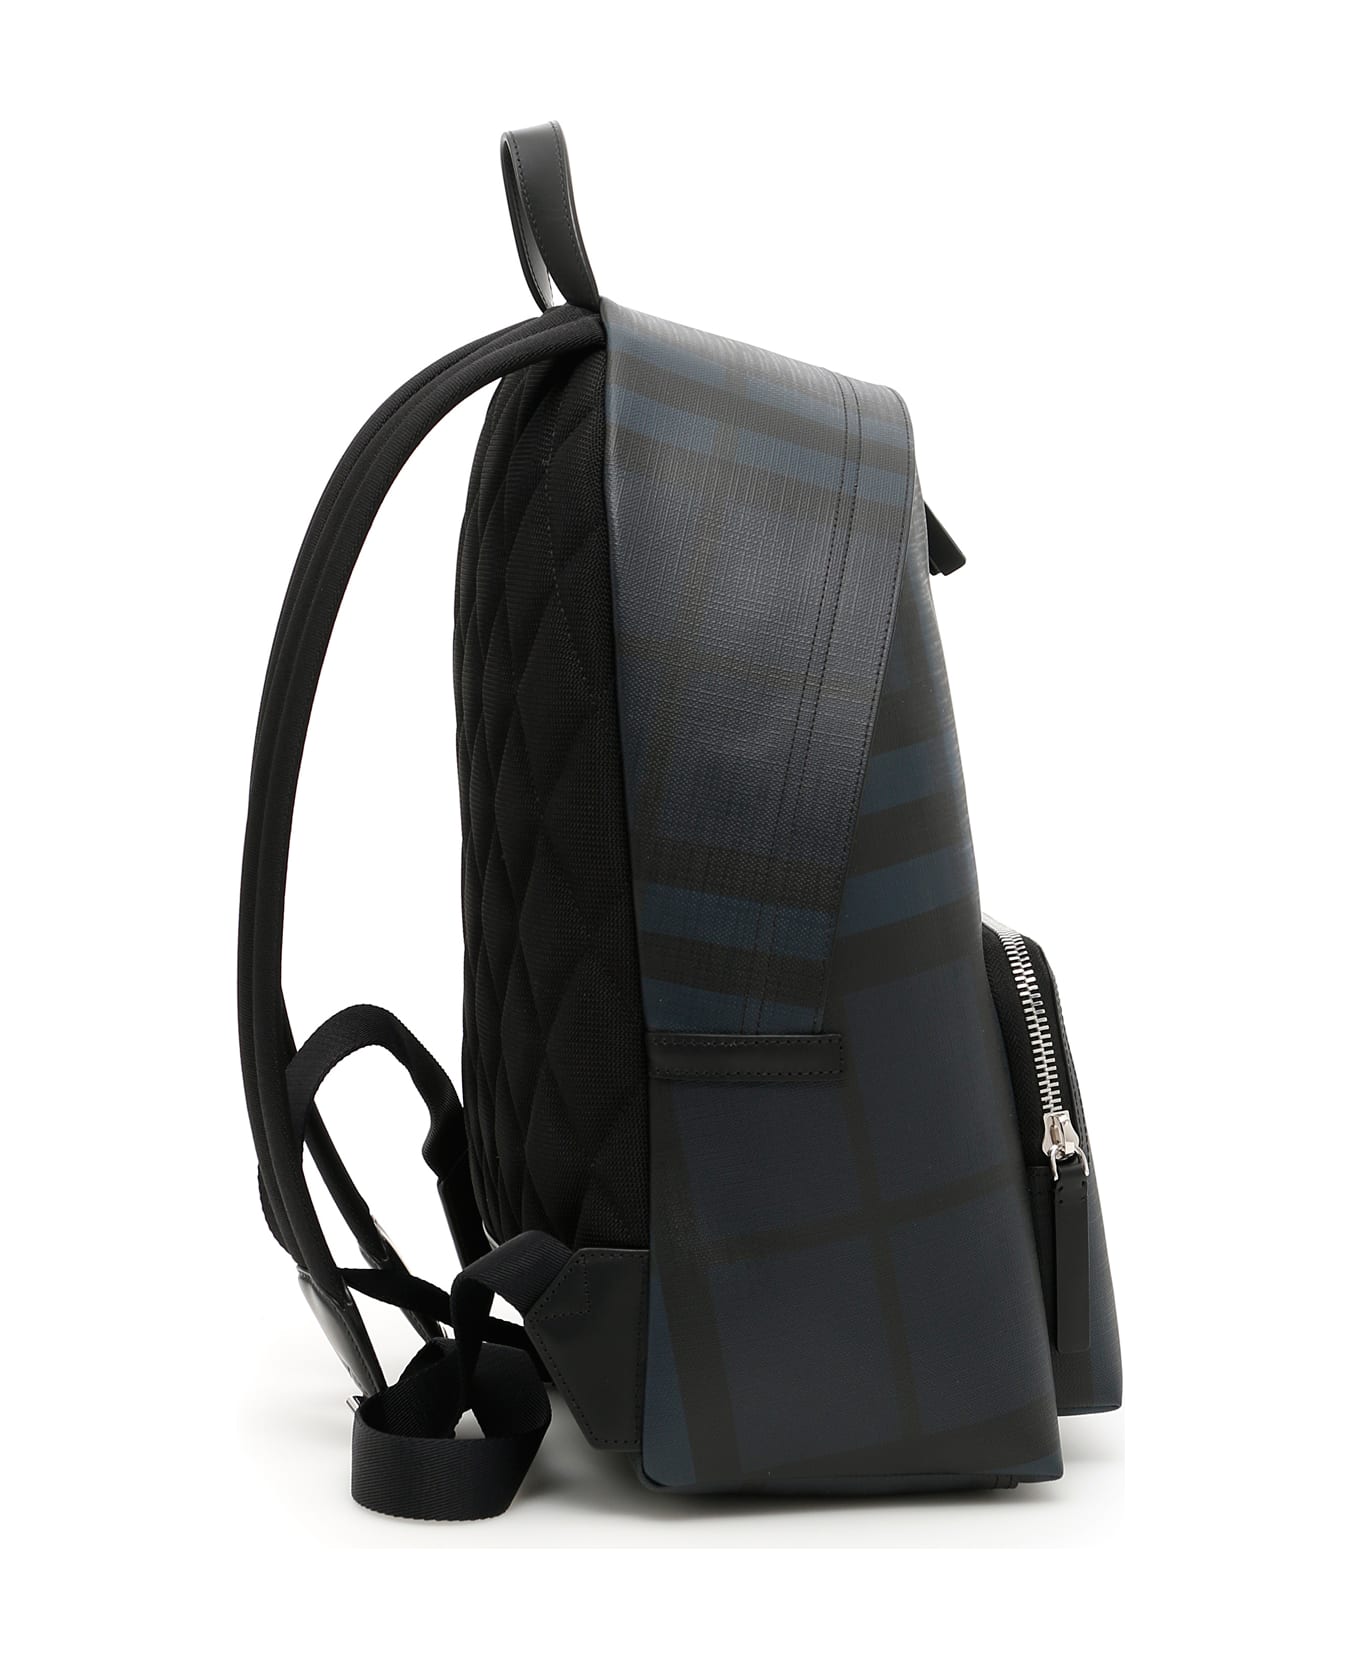 Burberry London Check Abbeydale Backpack | italist